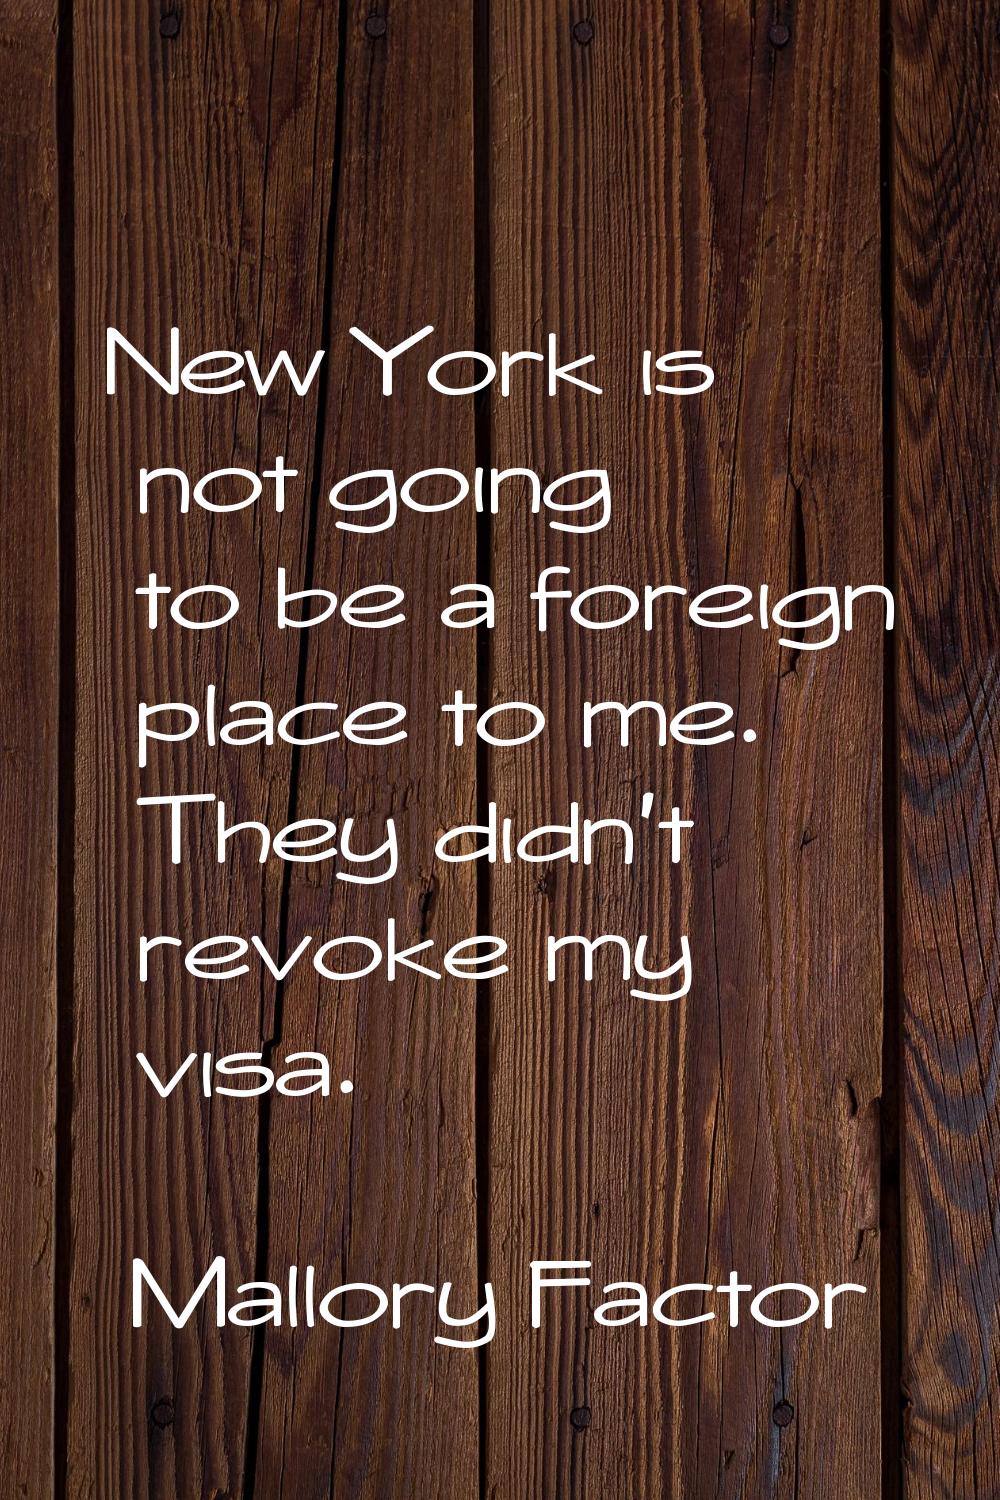 New York is not going to be a foreign place to me. They didn't revoke my visa.